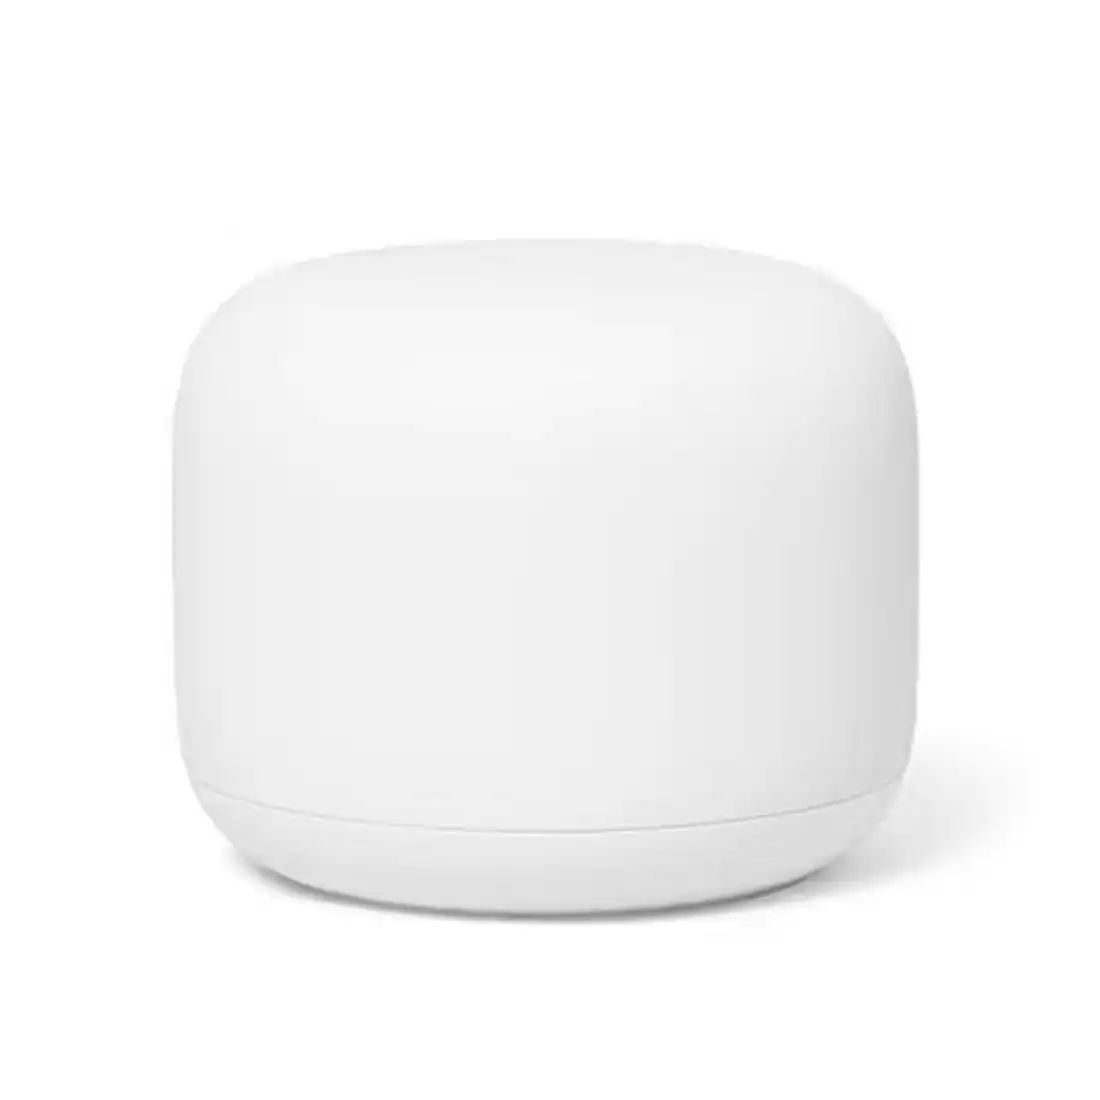 Google Nest WiFi Mesh Router 1 Pack (Base Unit, No Package)